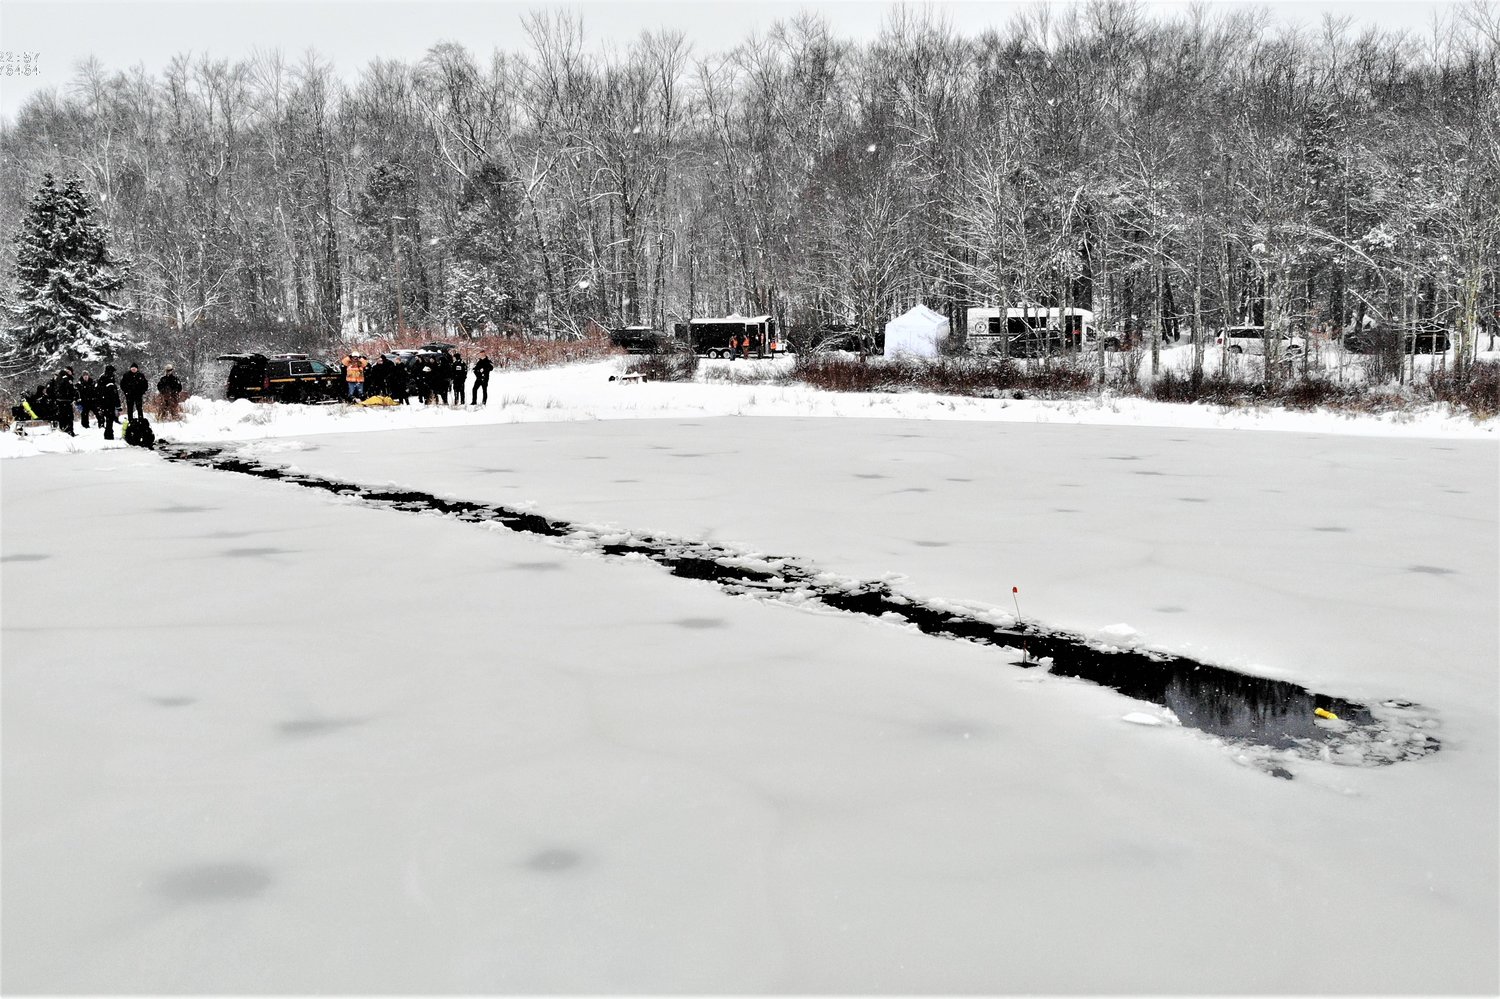 Divers cut a path through the ice to reach the victims.